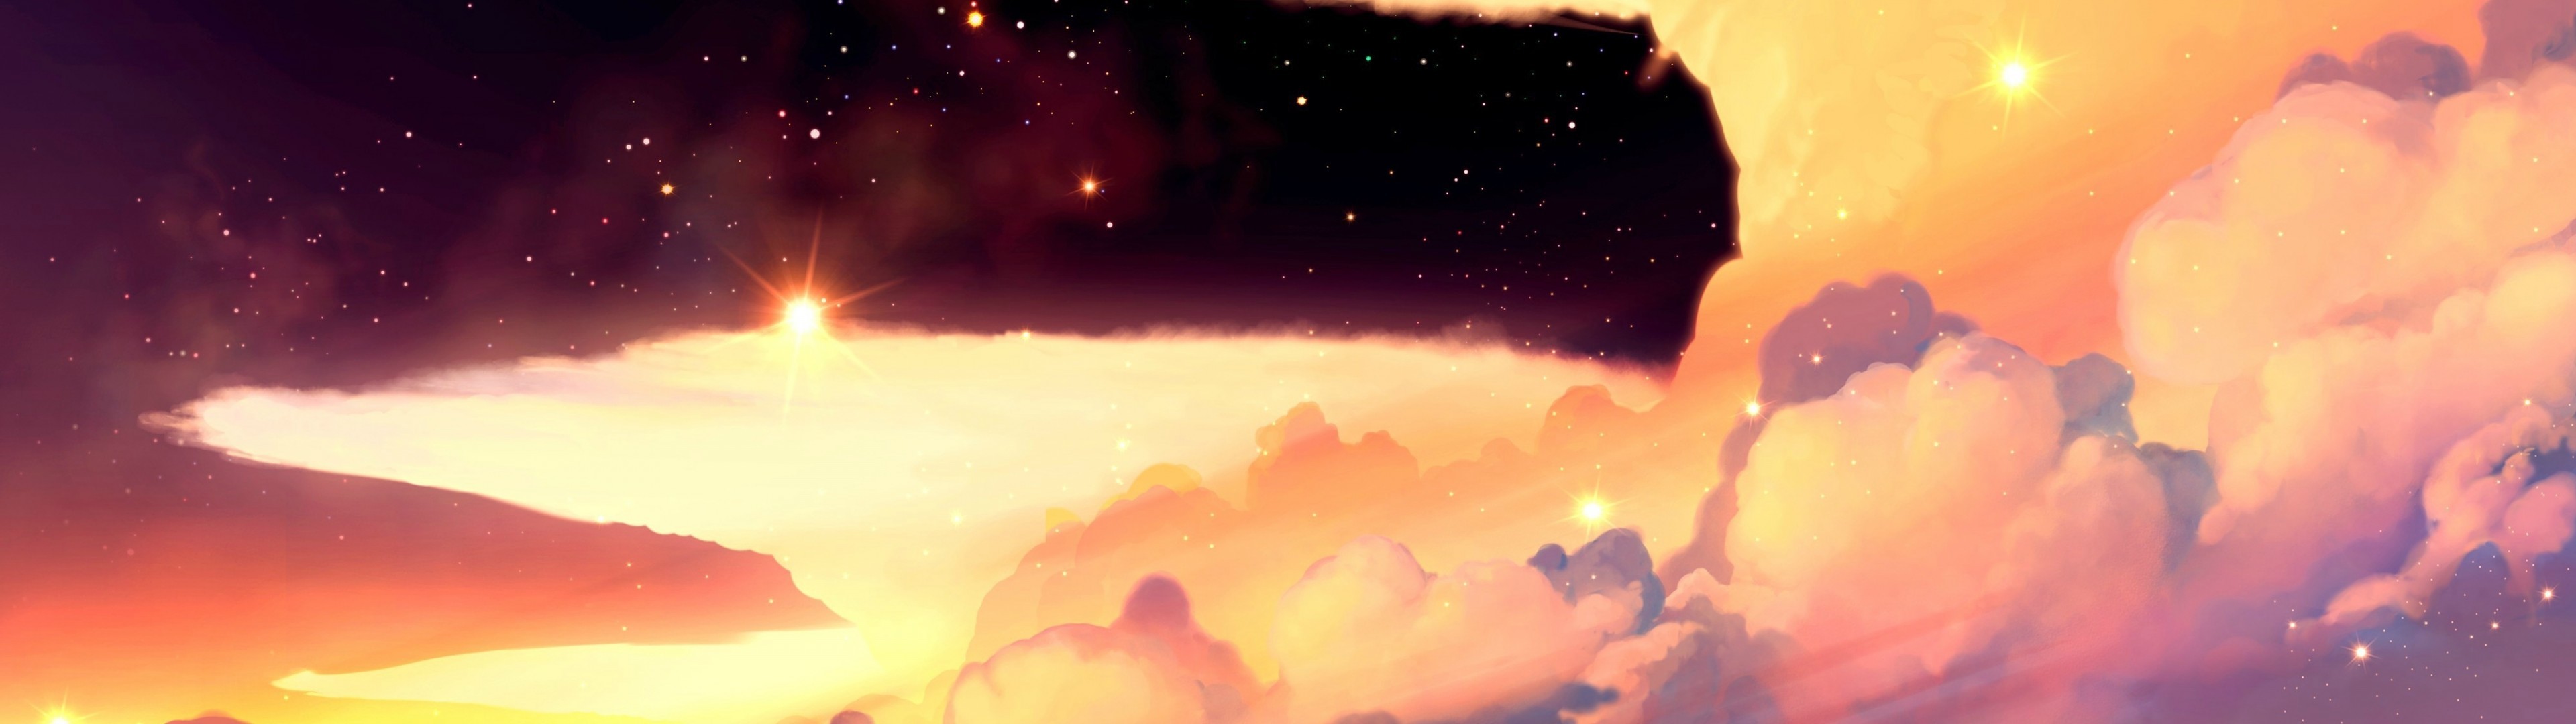 Anime Landscape, Scenic, Anime Girl, Clouds, Sky, Stars, - Sunset Anime Clouds Background - HD Wallpaper 